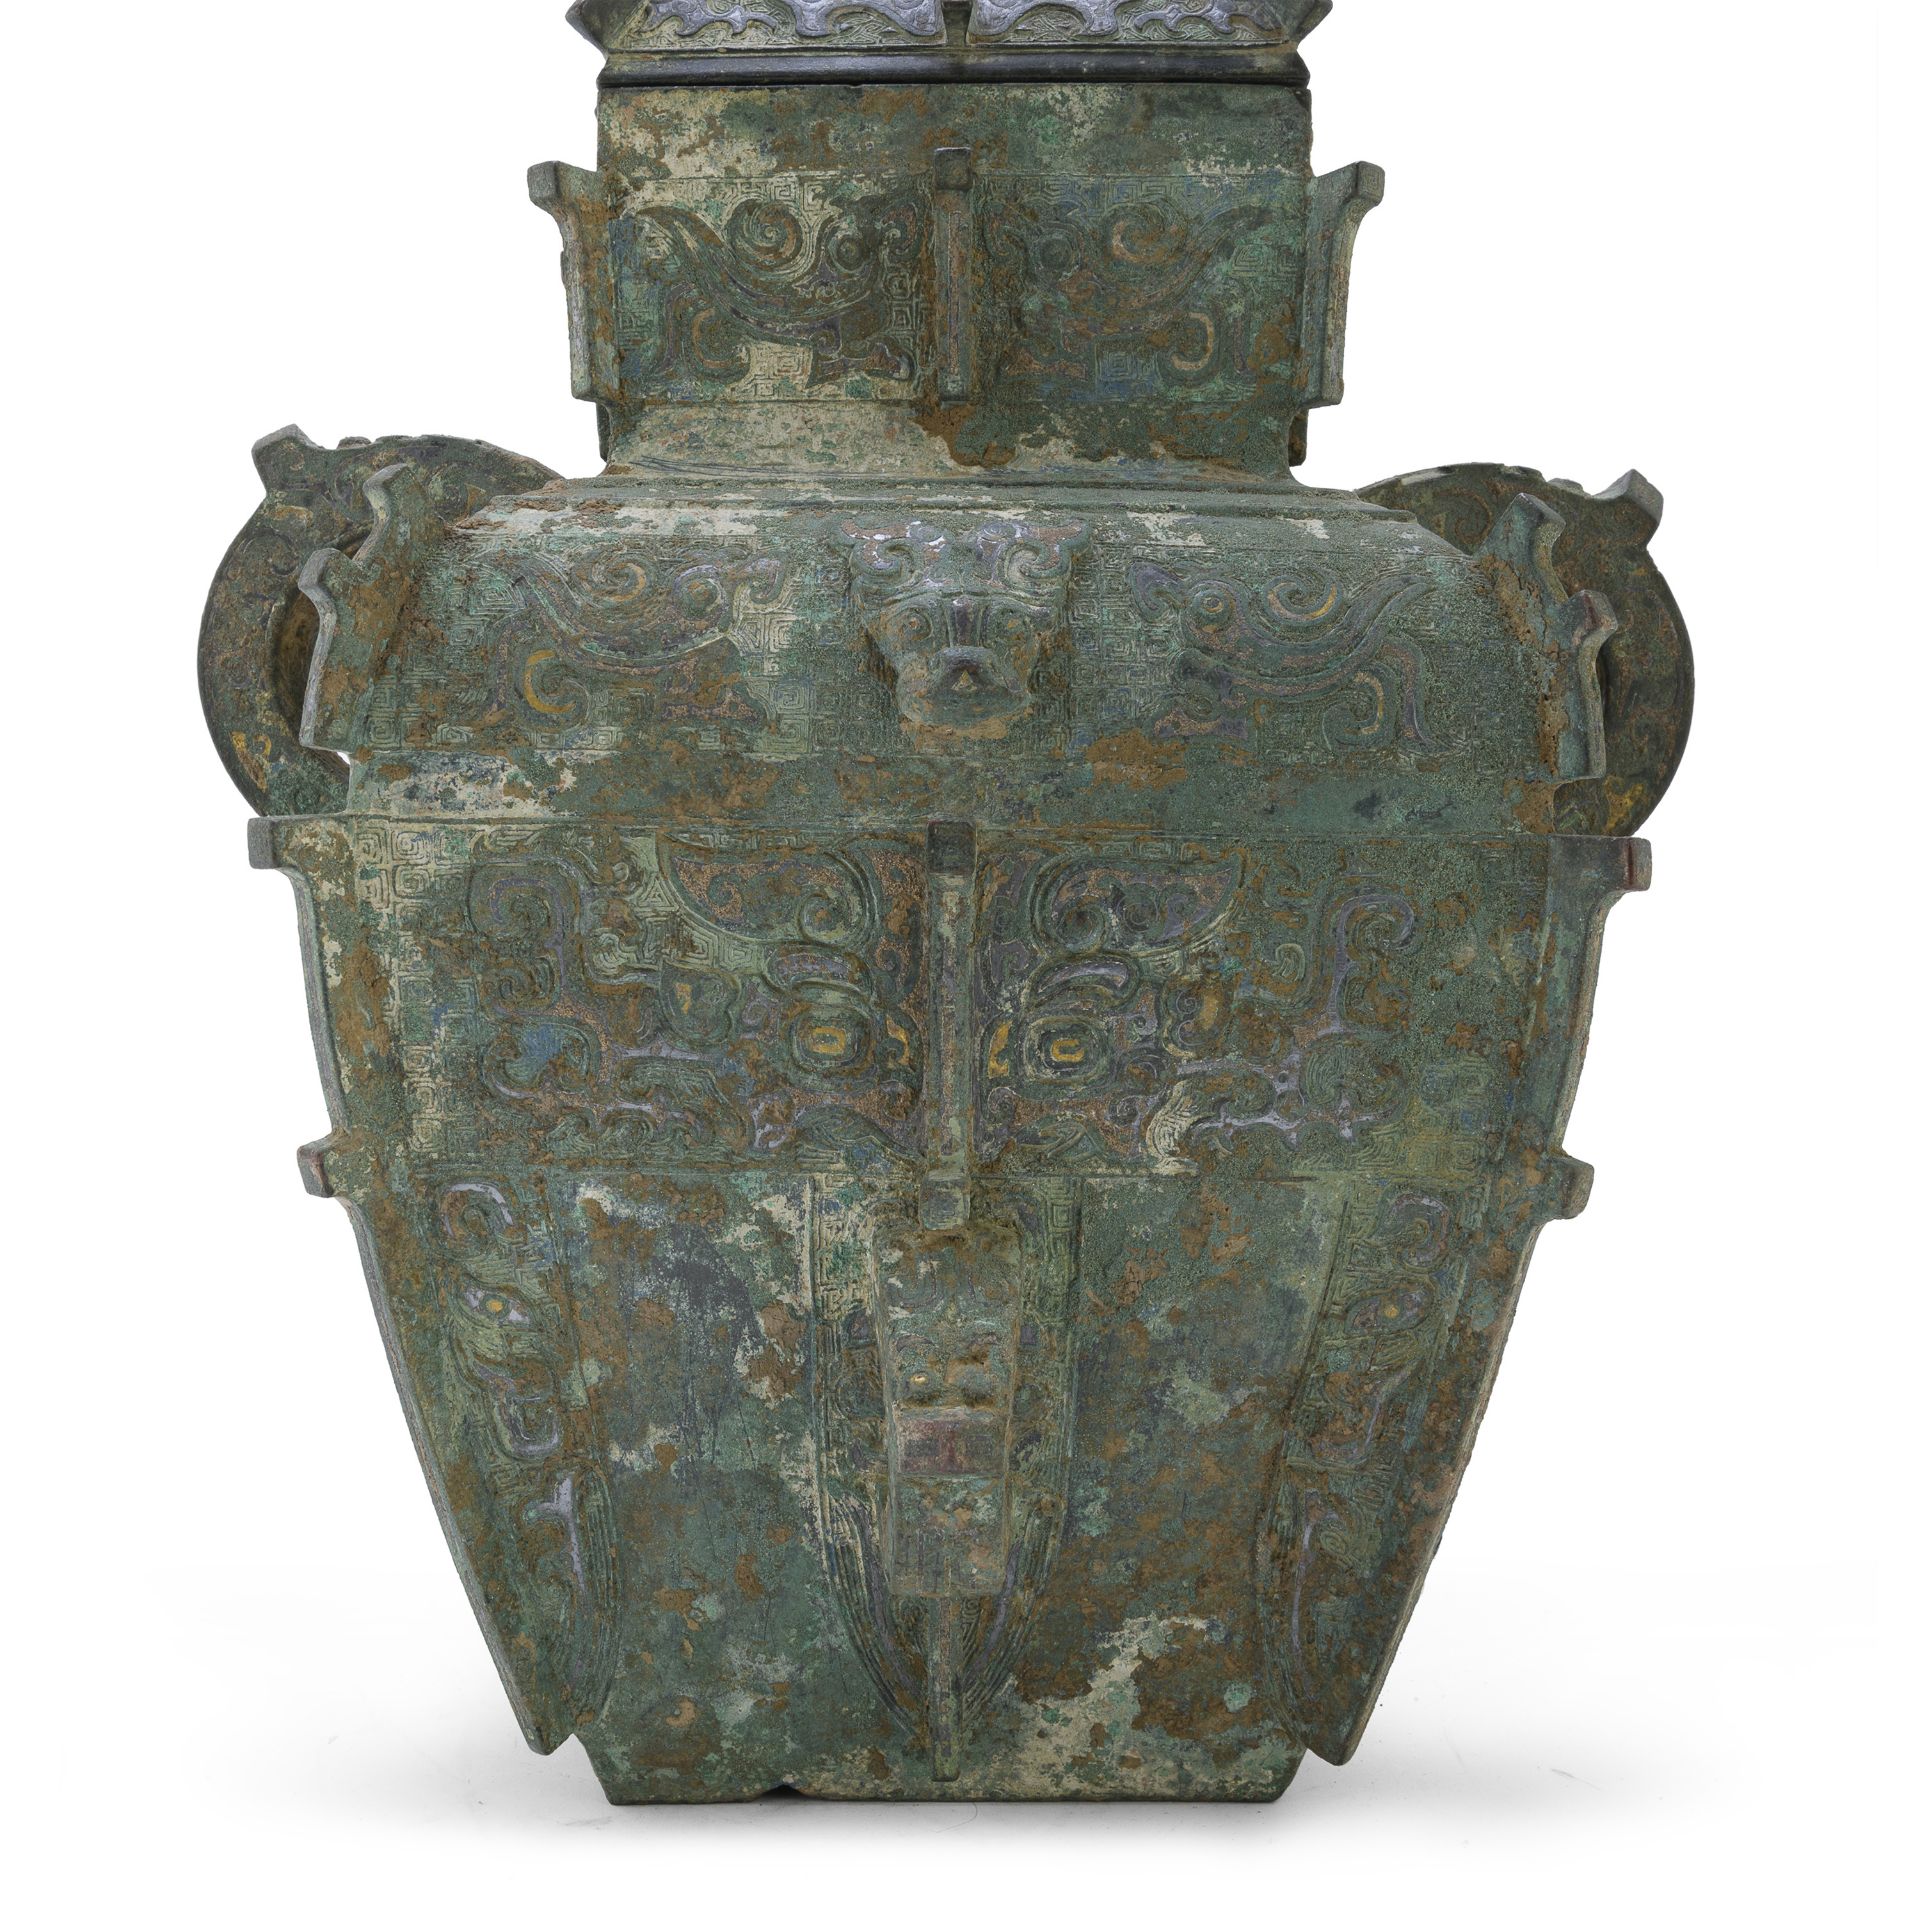 A RARE CHINESE BRONZE VASE 12TH - 13TH CENTURY. - Image 5 of 7